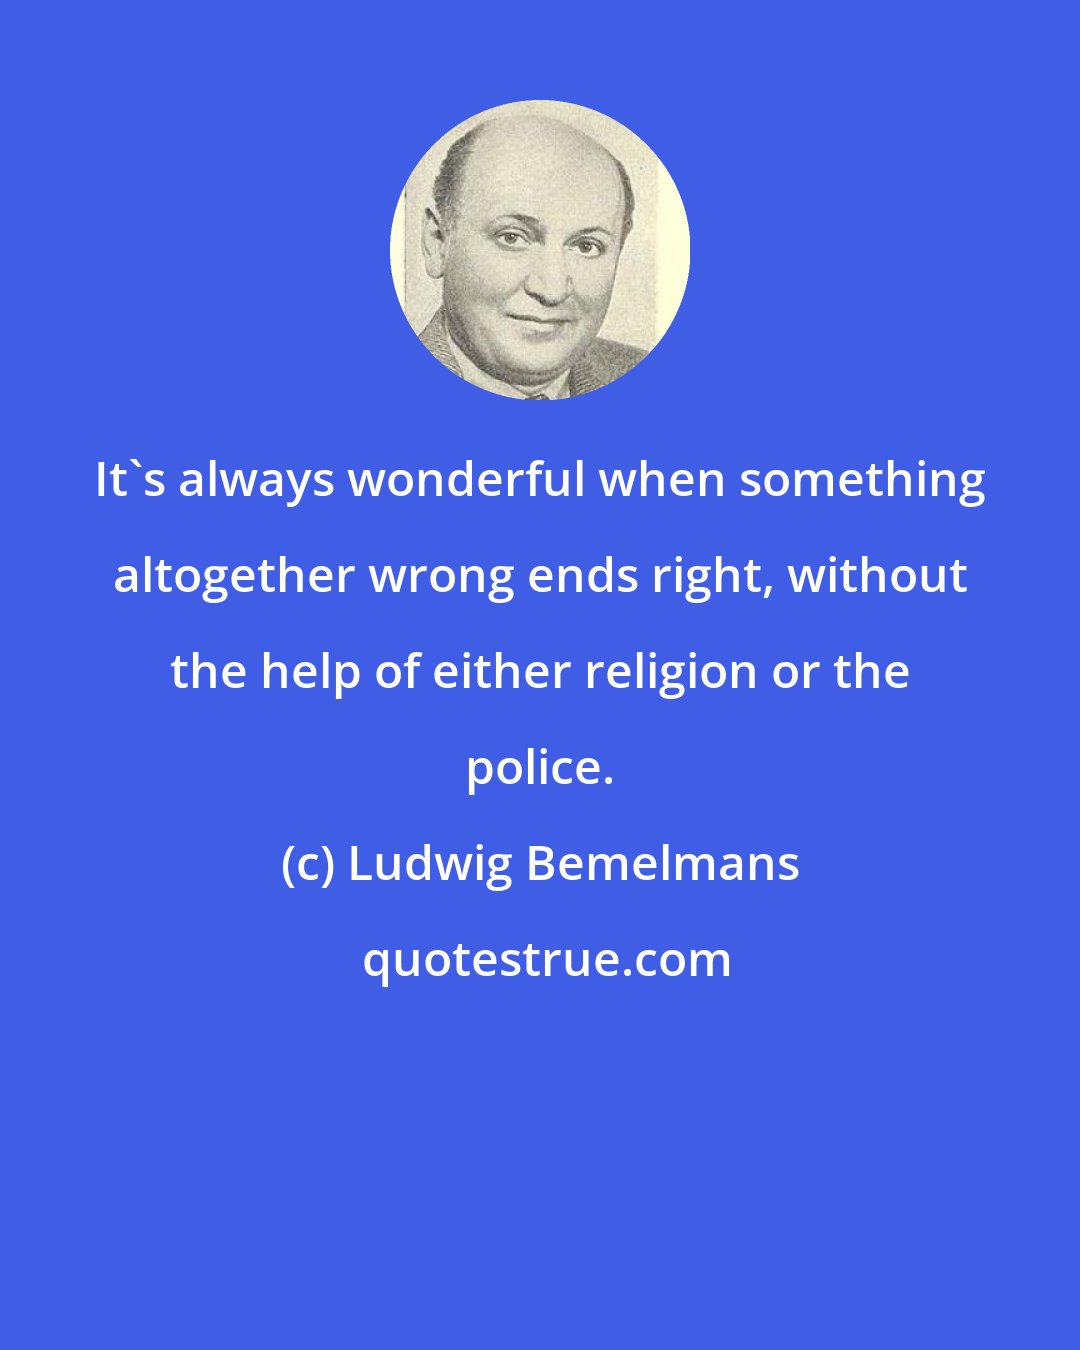 Ludwig Bemelmans: It's always wonderful when something altogether wrong ends right, without the help of either religion or the police.